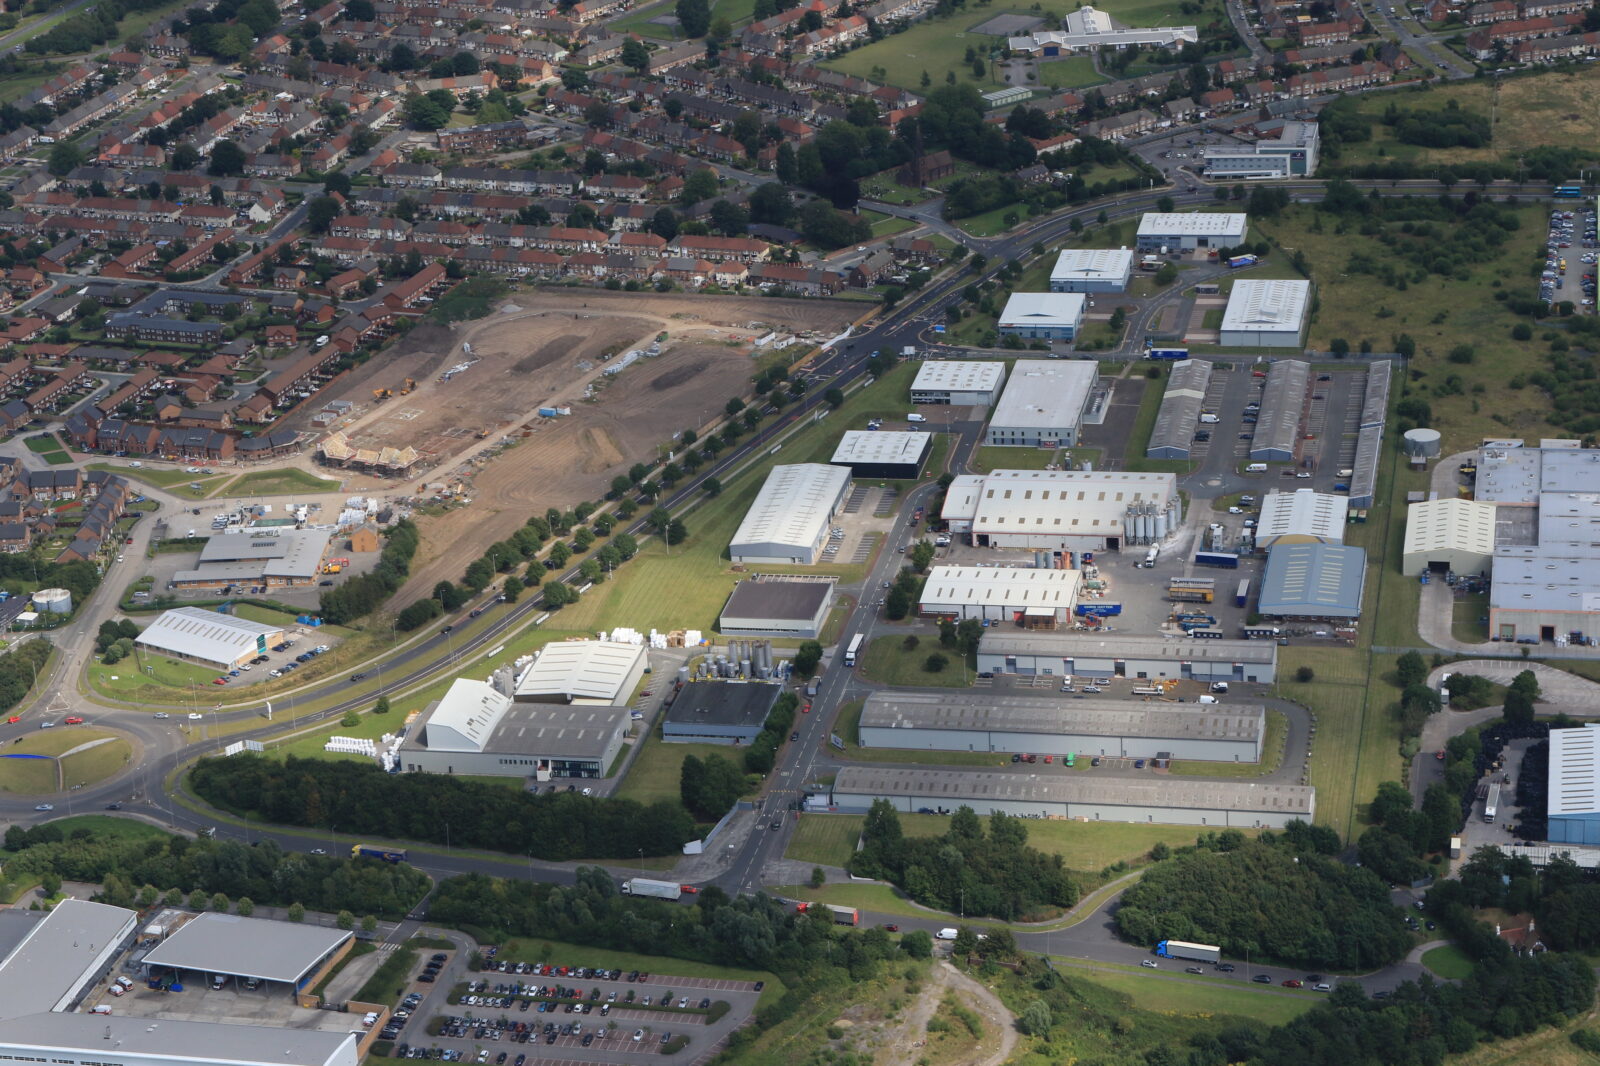 Compass Industrial Park, Speke, South Liverpool